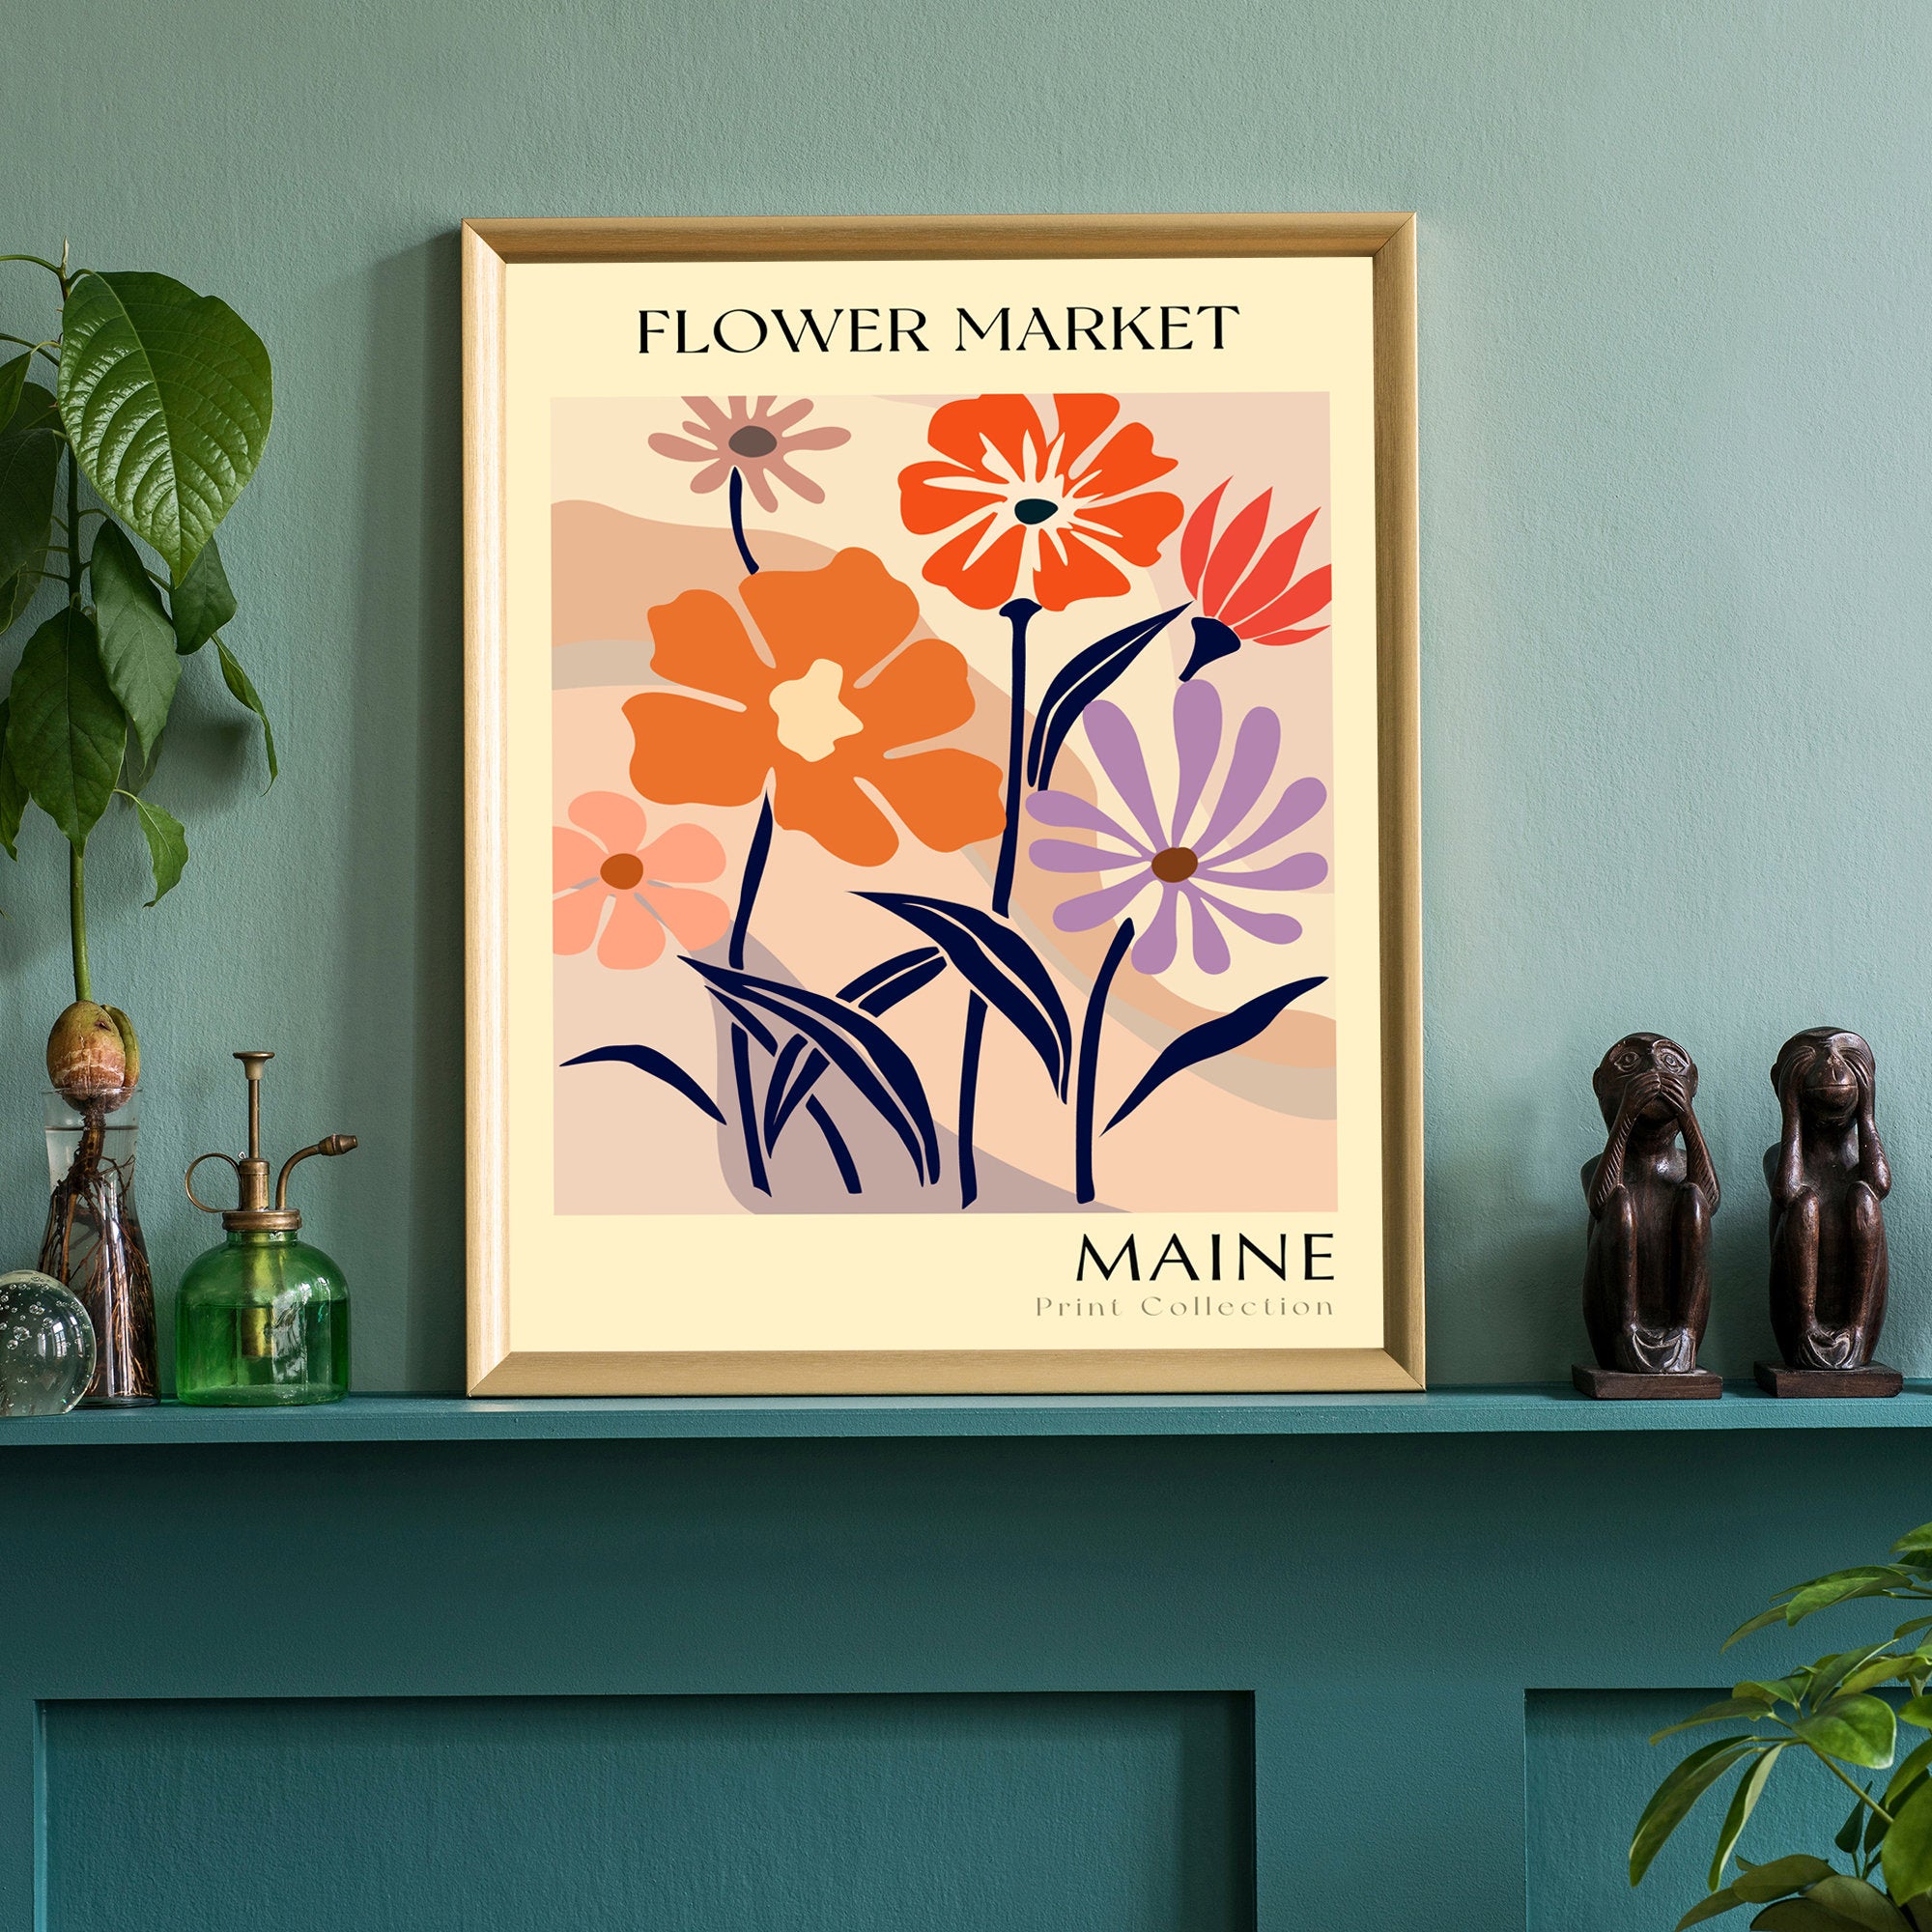 Maine State flower print, USA states poster, Maine flower market poster, Botanical posters, Nature poster artwork, Boho floral wall art